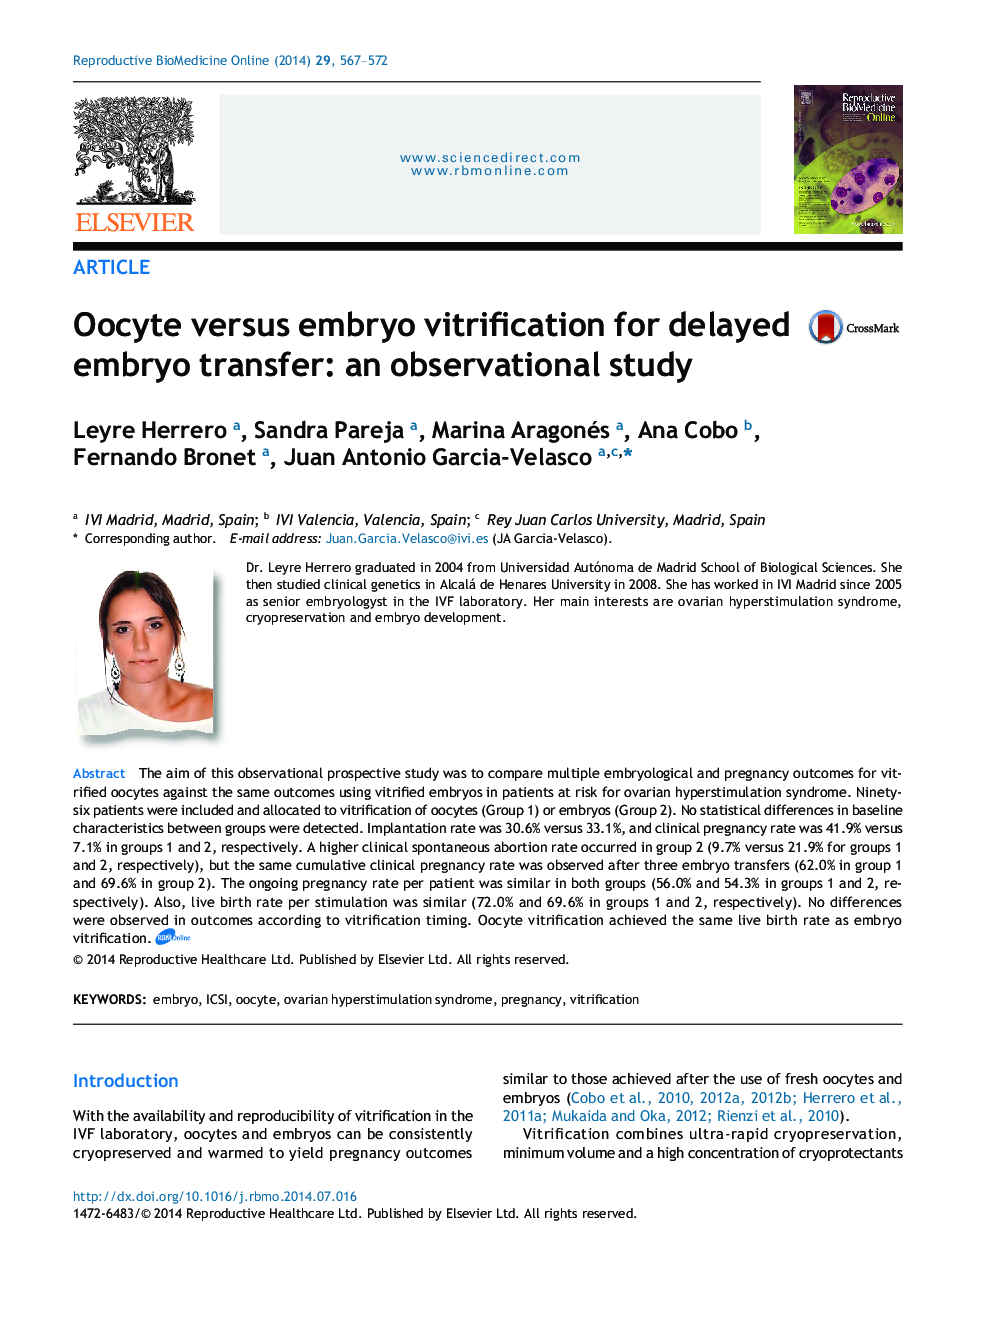 Oocyte versus embryo vitrification for delayed embryo transfer: an observational study